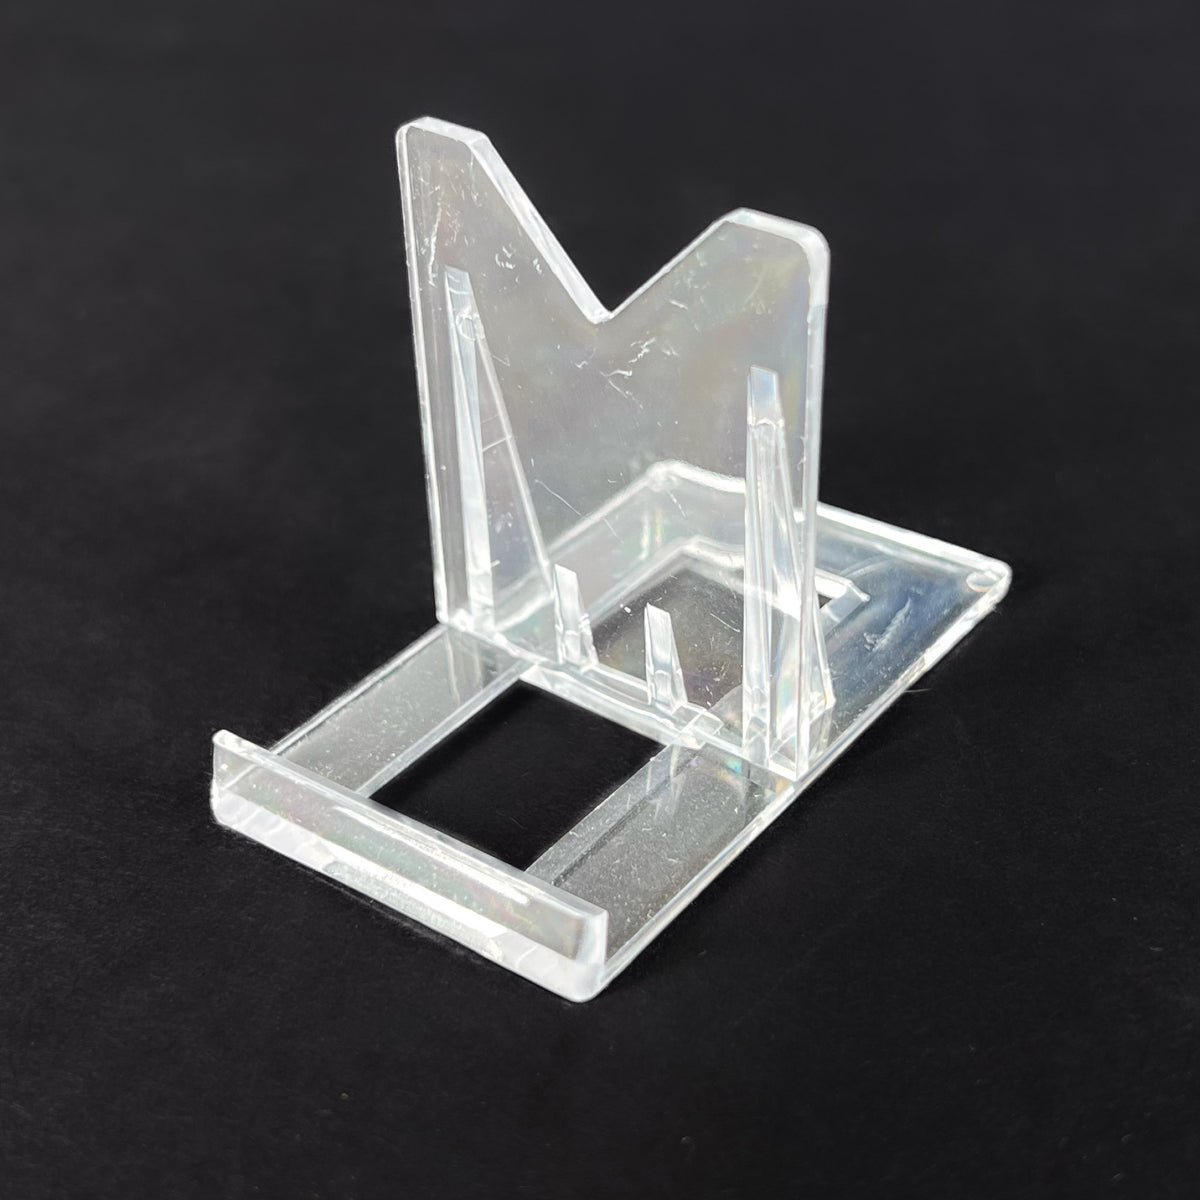 Adjustable 2 part Clear Acrylic Display Stand for Crystals or Fossils